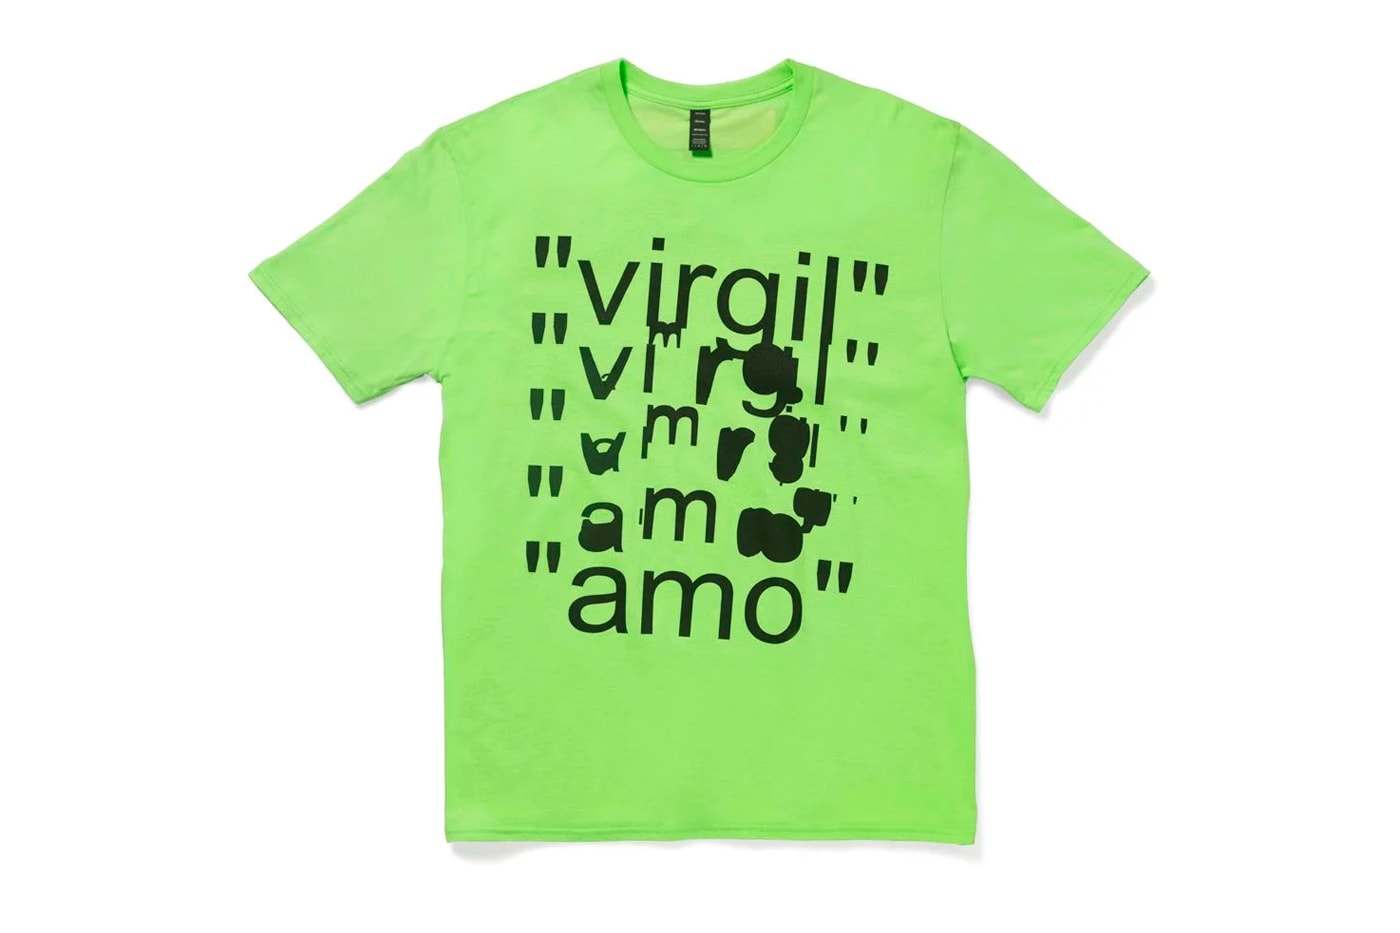 MCA Chicago x Virgil Abloh Neon-Colored Apparel | Hypebeast